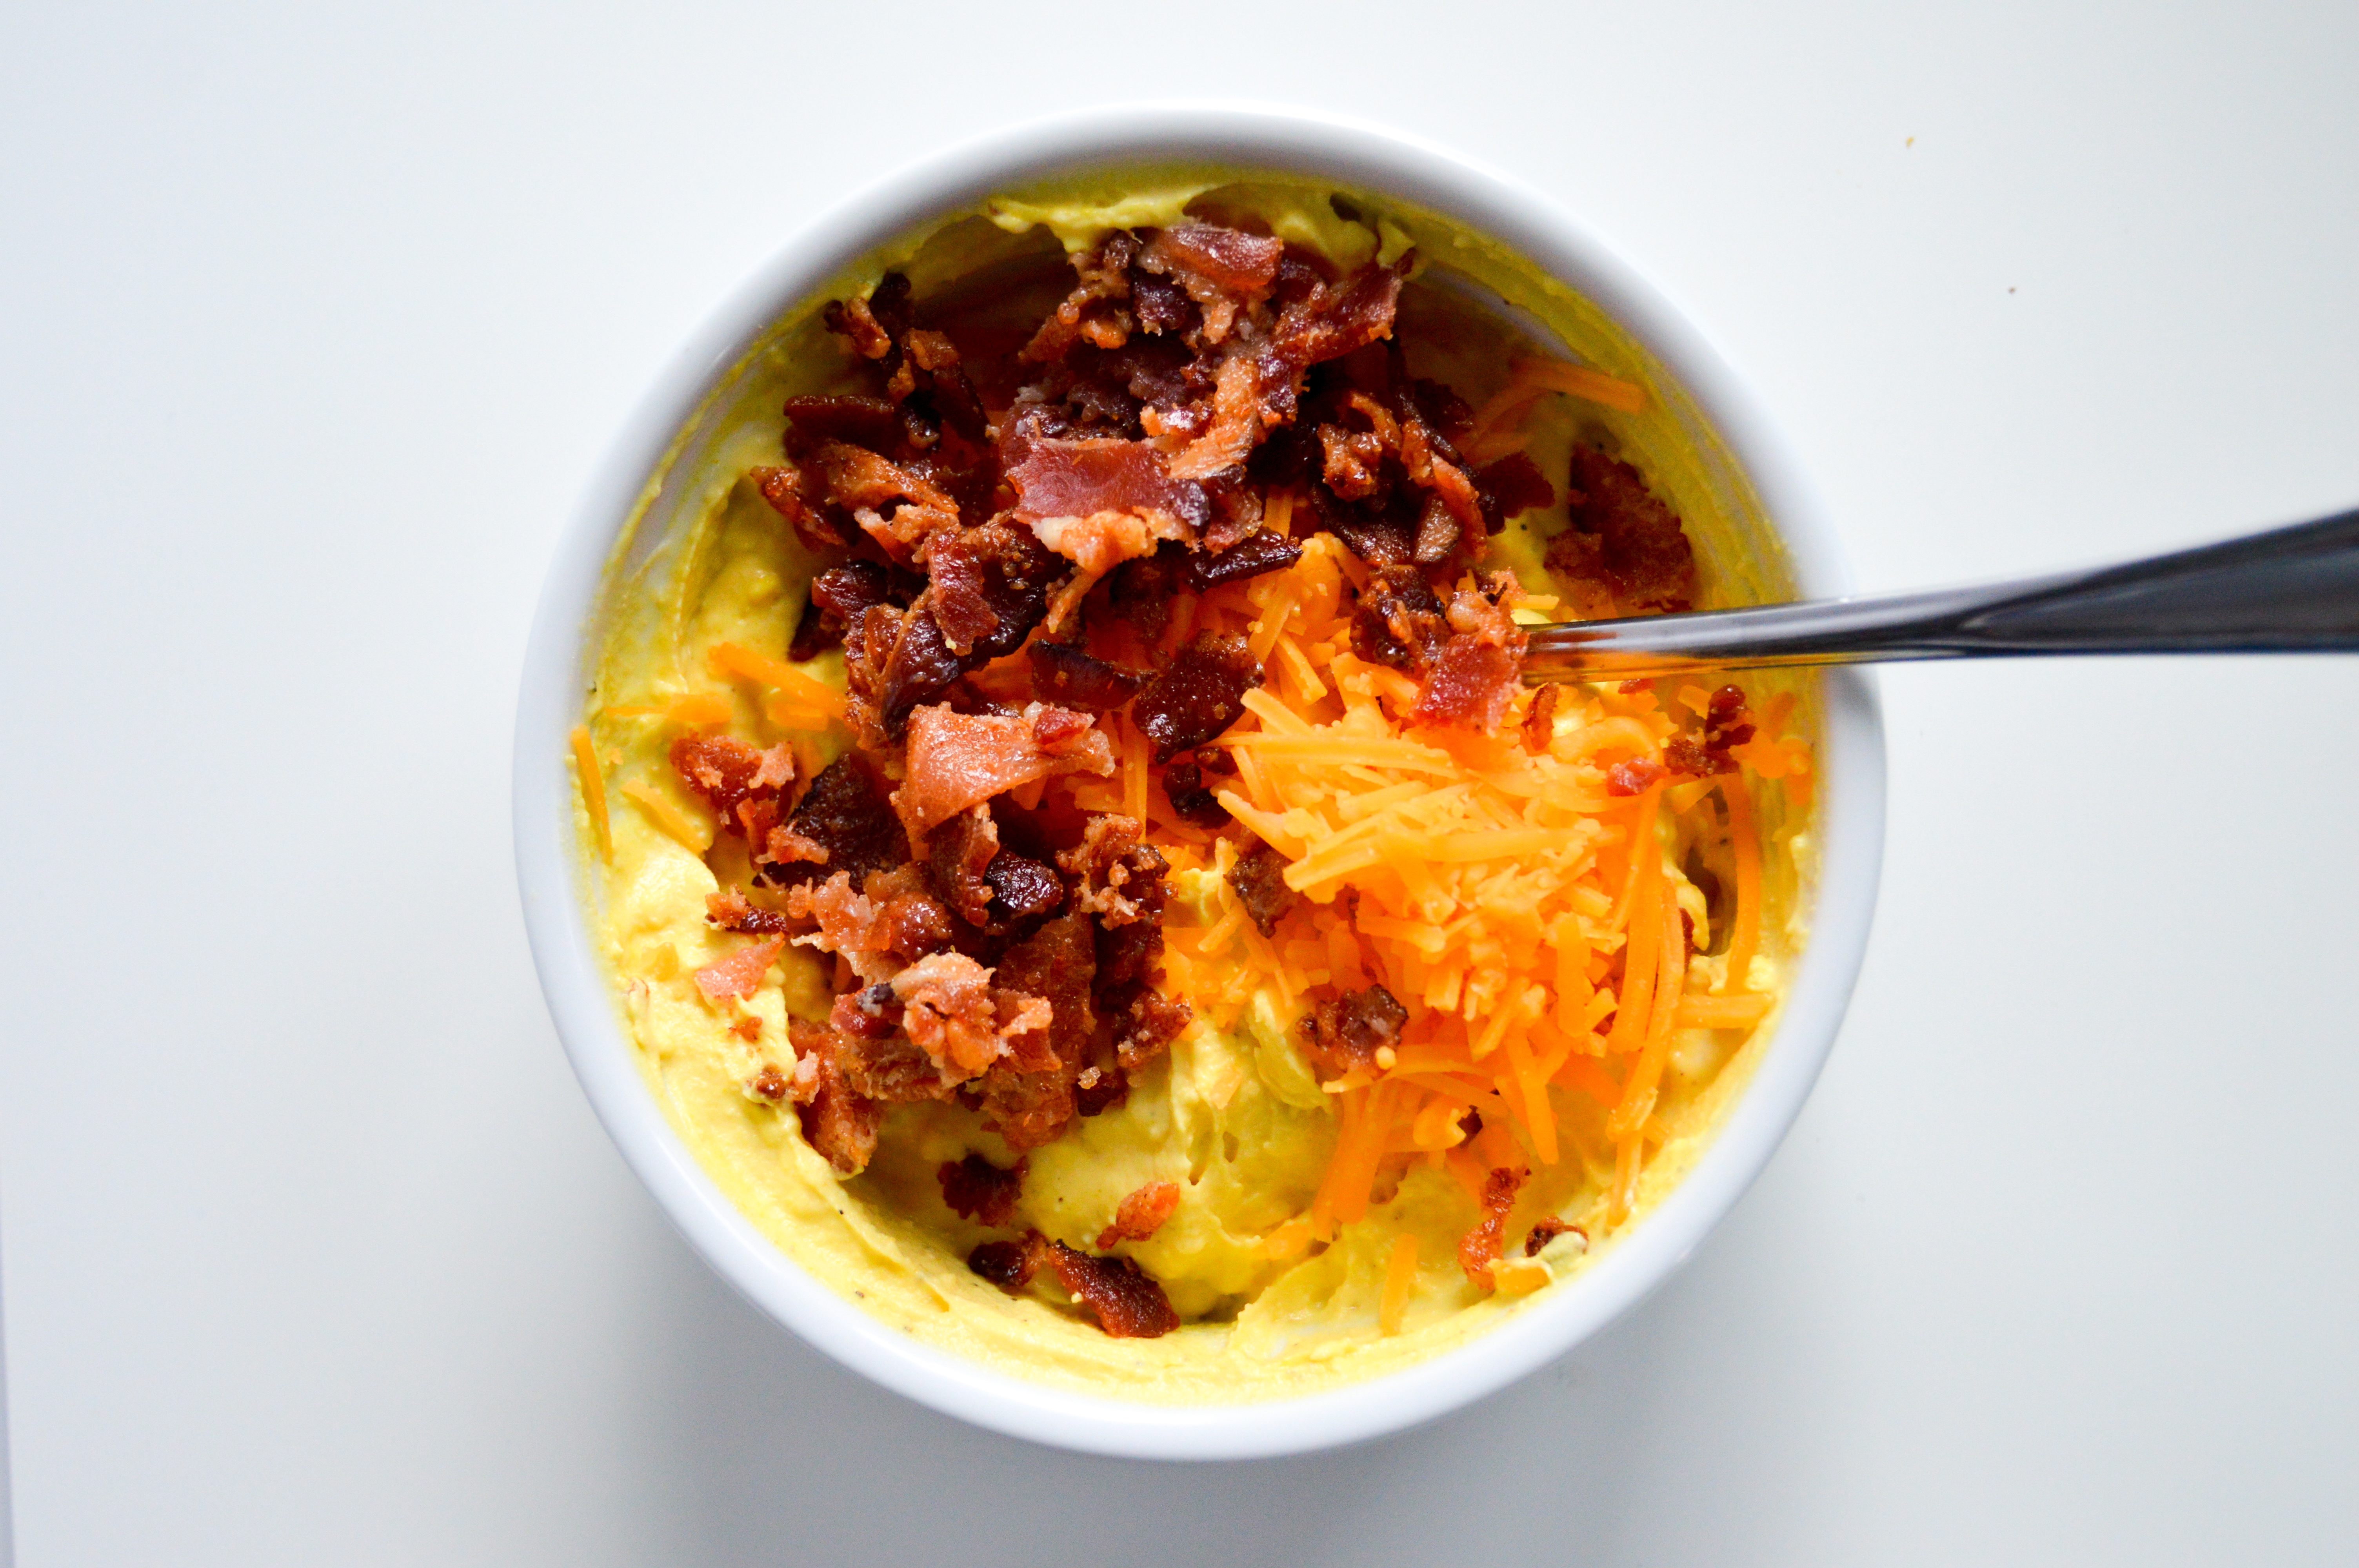 Directions for Bacon Loaded Deviled Eggs - create yolk mixture. Add shredded cheddar cheese and bacon crumbles